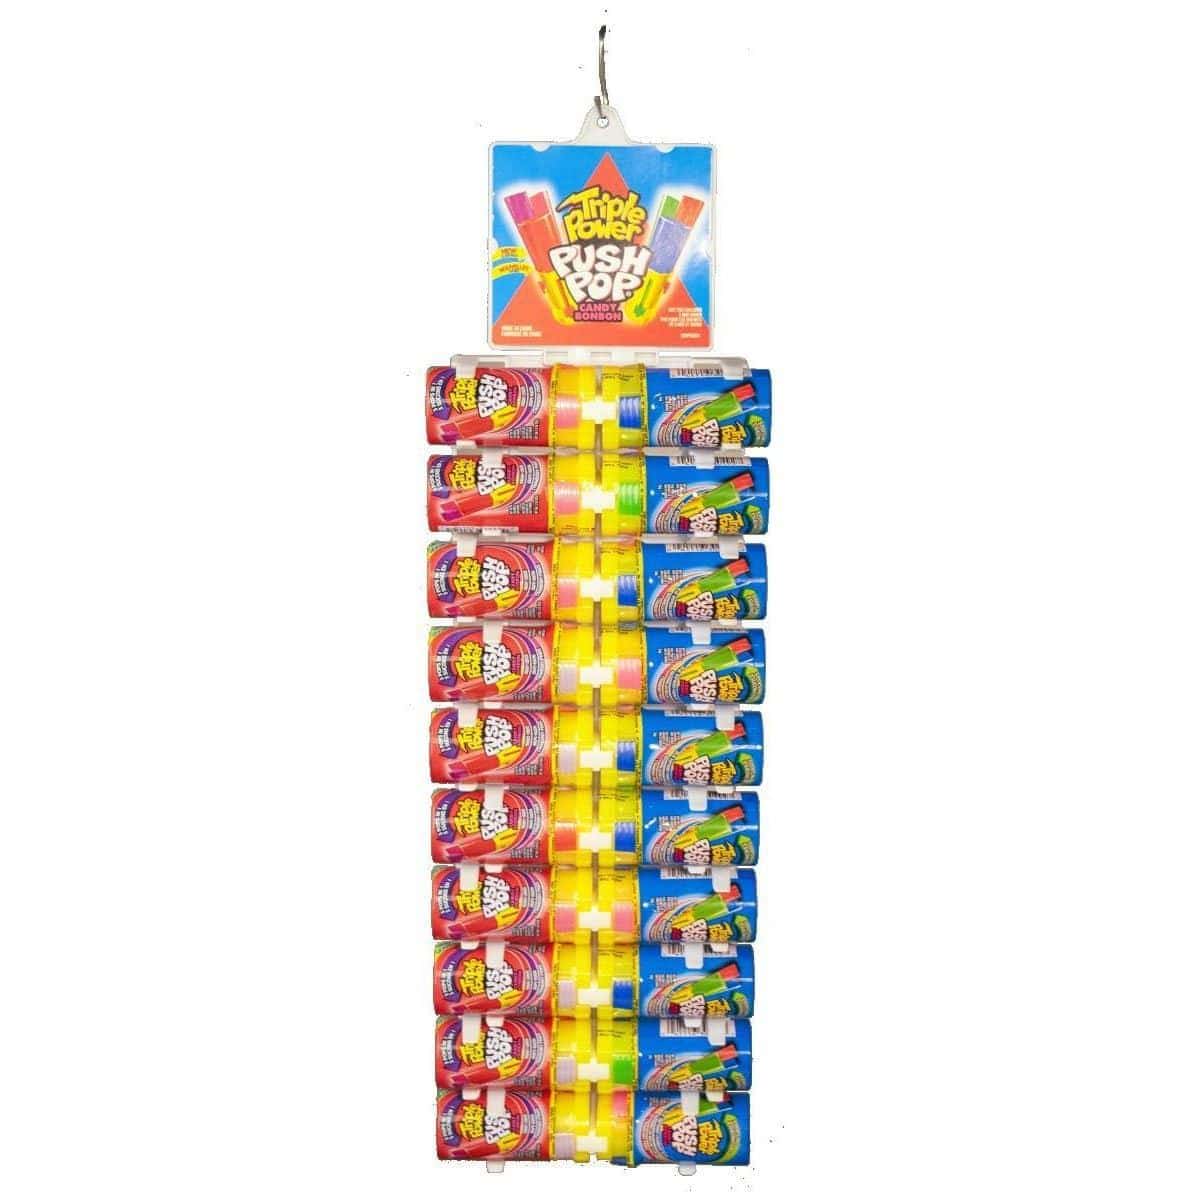 Buy Candy Triple push pop - Assortment sold at Party Expert